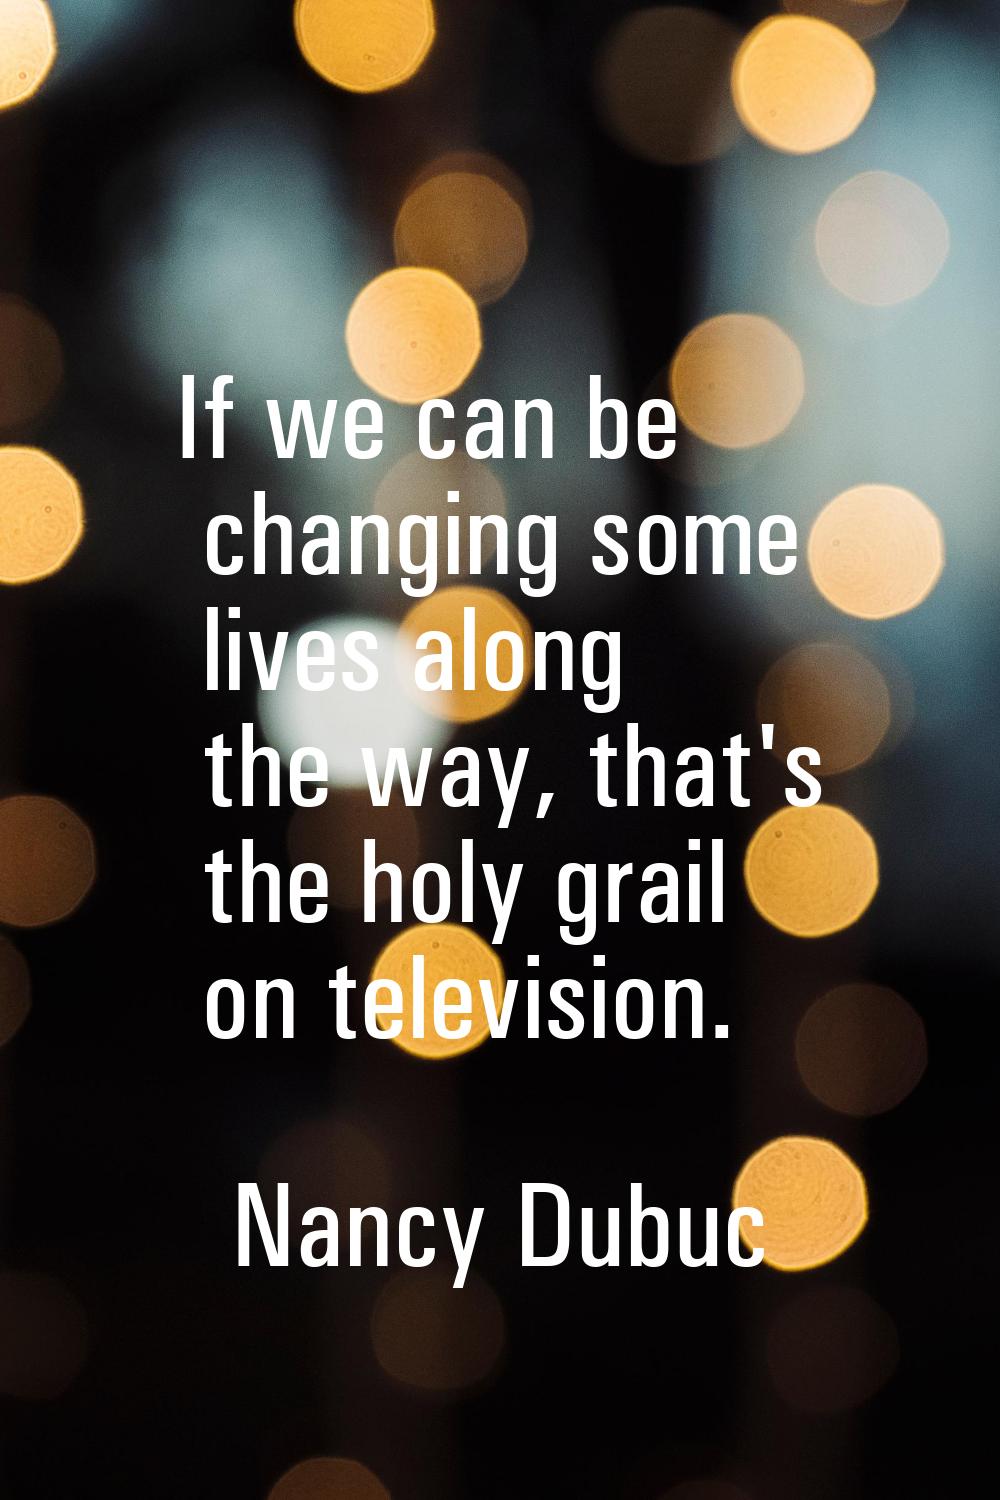 If we can be changing some lives along the way, that's the holy grail on television.